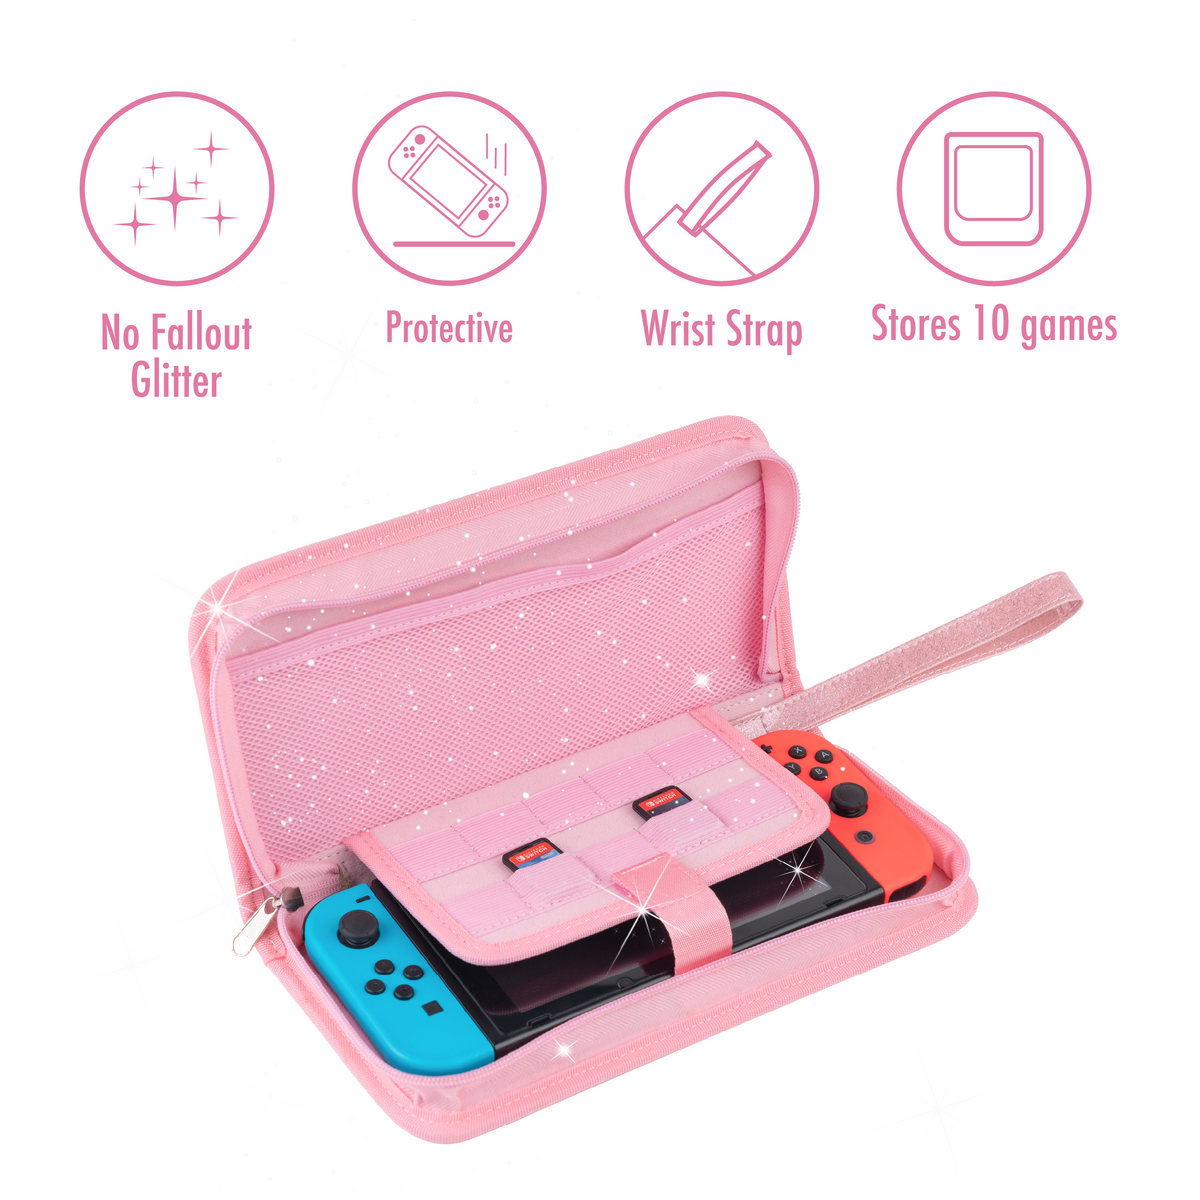 GUTIAL Accessories Kit for Nintendo Switch - Pink Cute Accessories Bundle  Girly Style Pack for girls with Travel Carrying Case and Dockable Cover